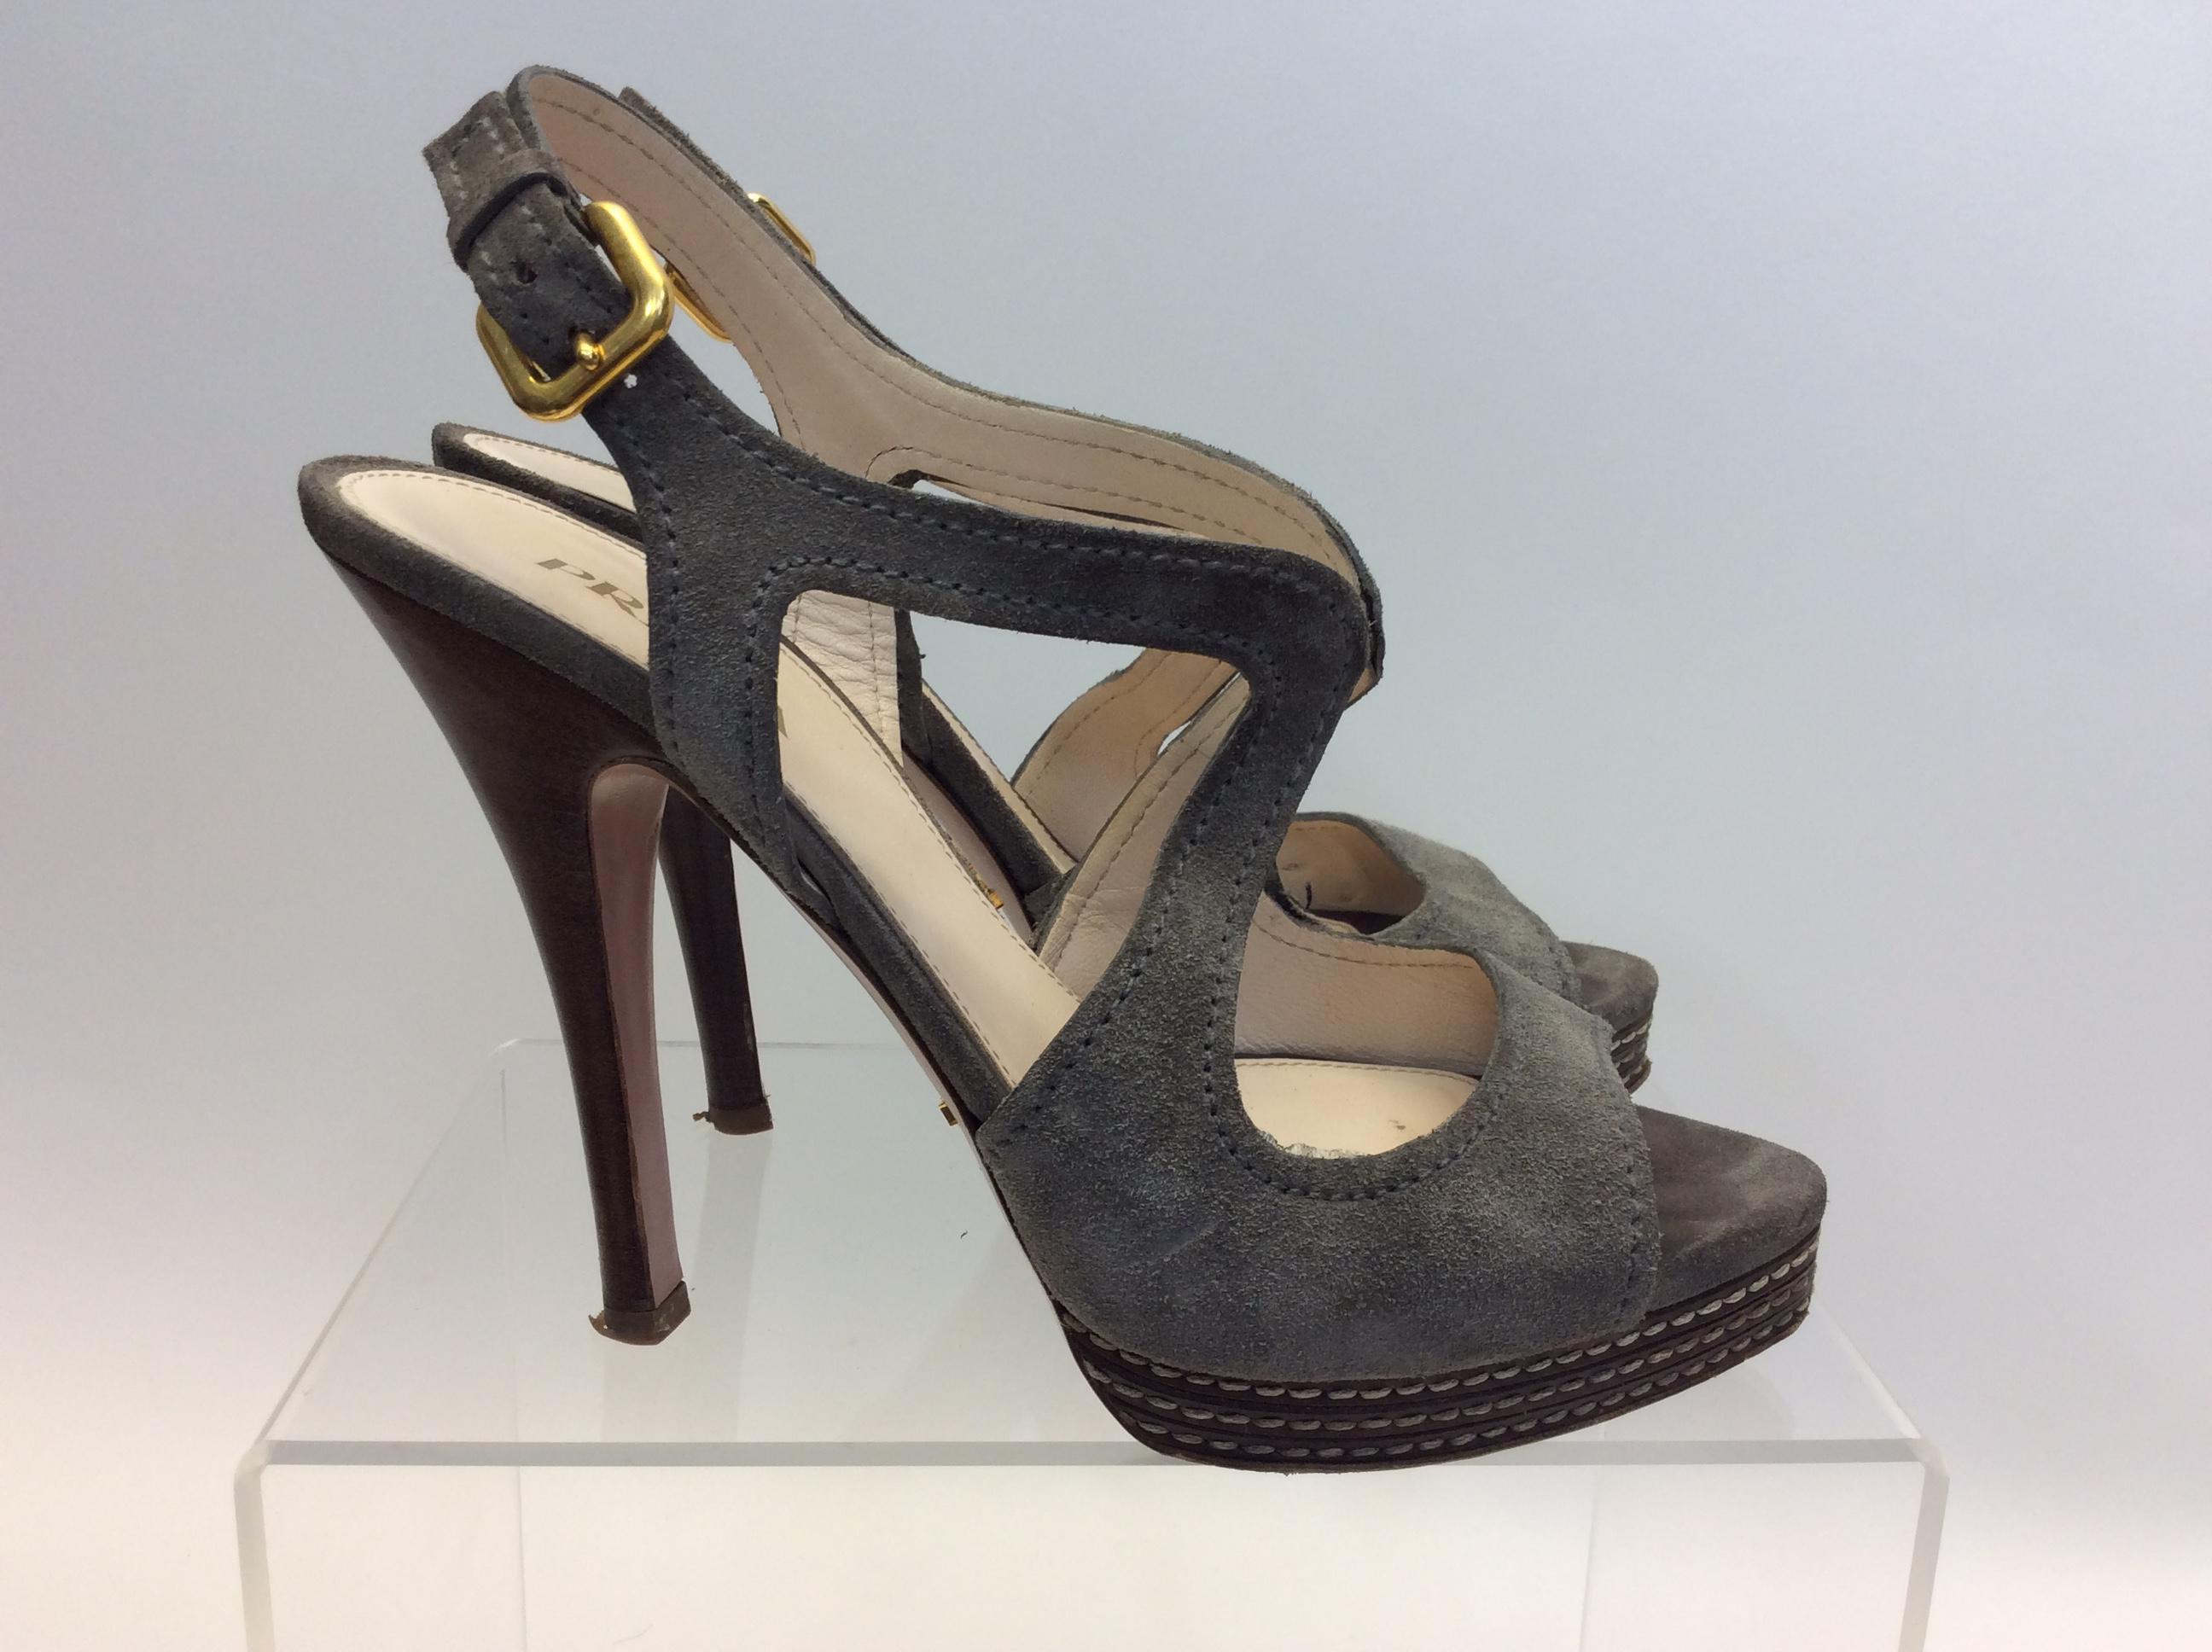 Prada Taupe Suede Heels In Good Condition For Sale In Narberth, PA